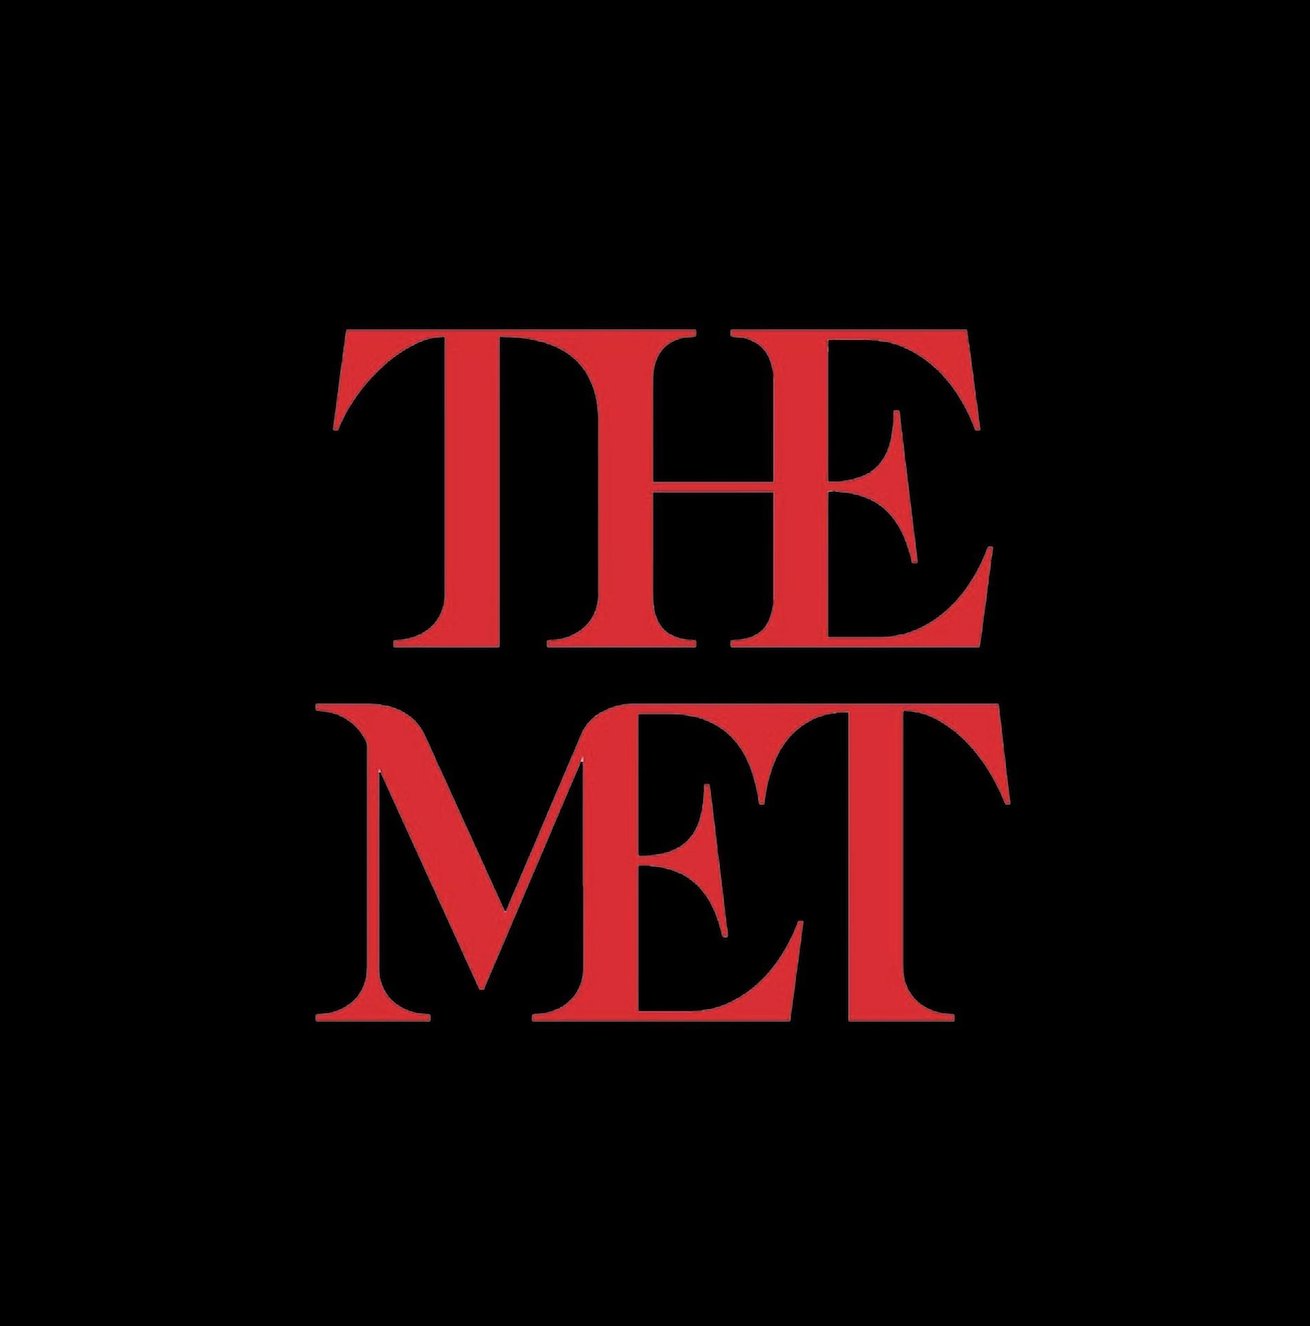 The Met Gala is known as one of the biggest nights in fashion